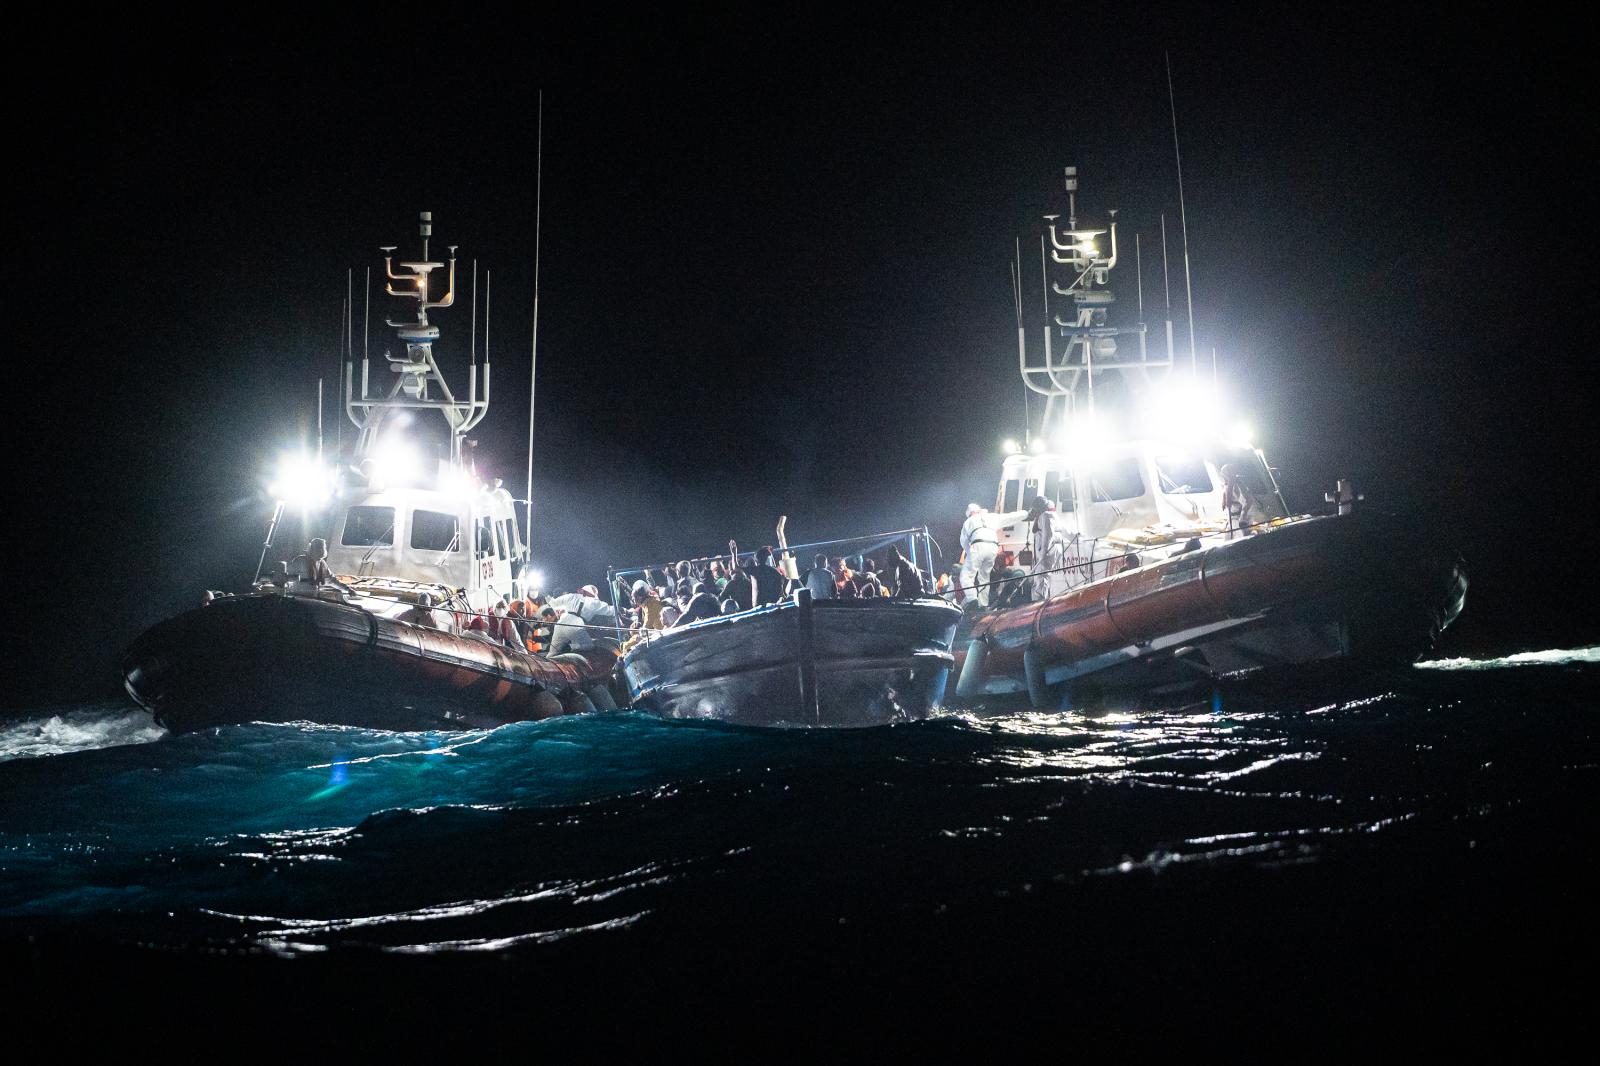 Image from DAILY NEWS - The Guardia Costiera rescued 280 people from a drifting...